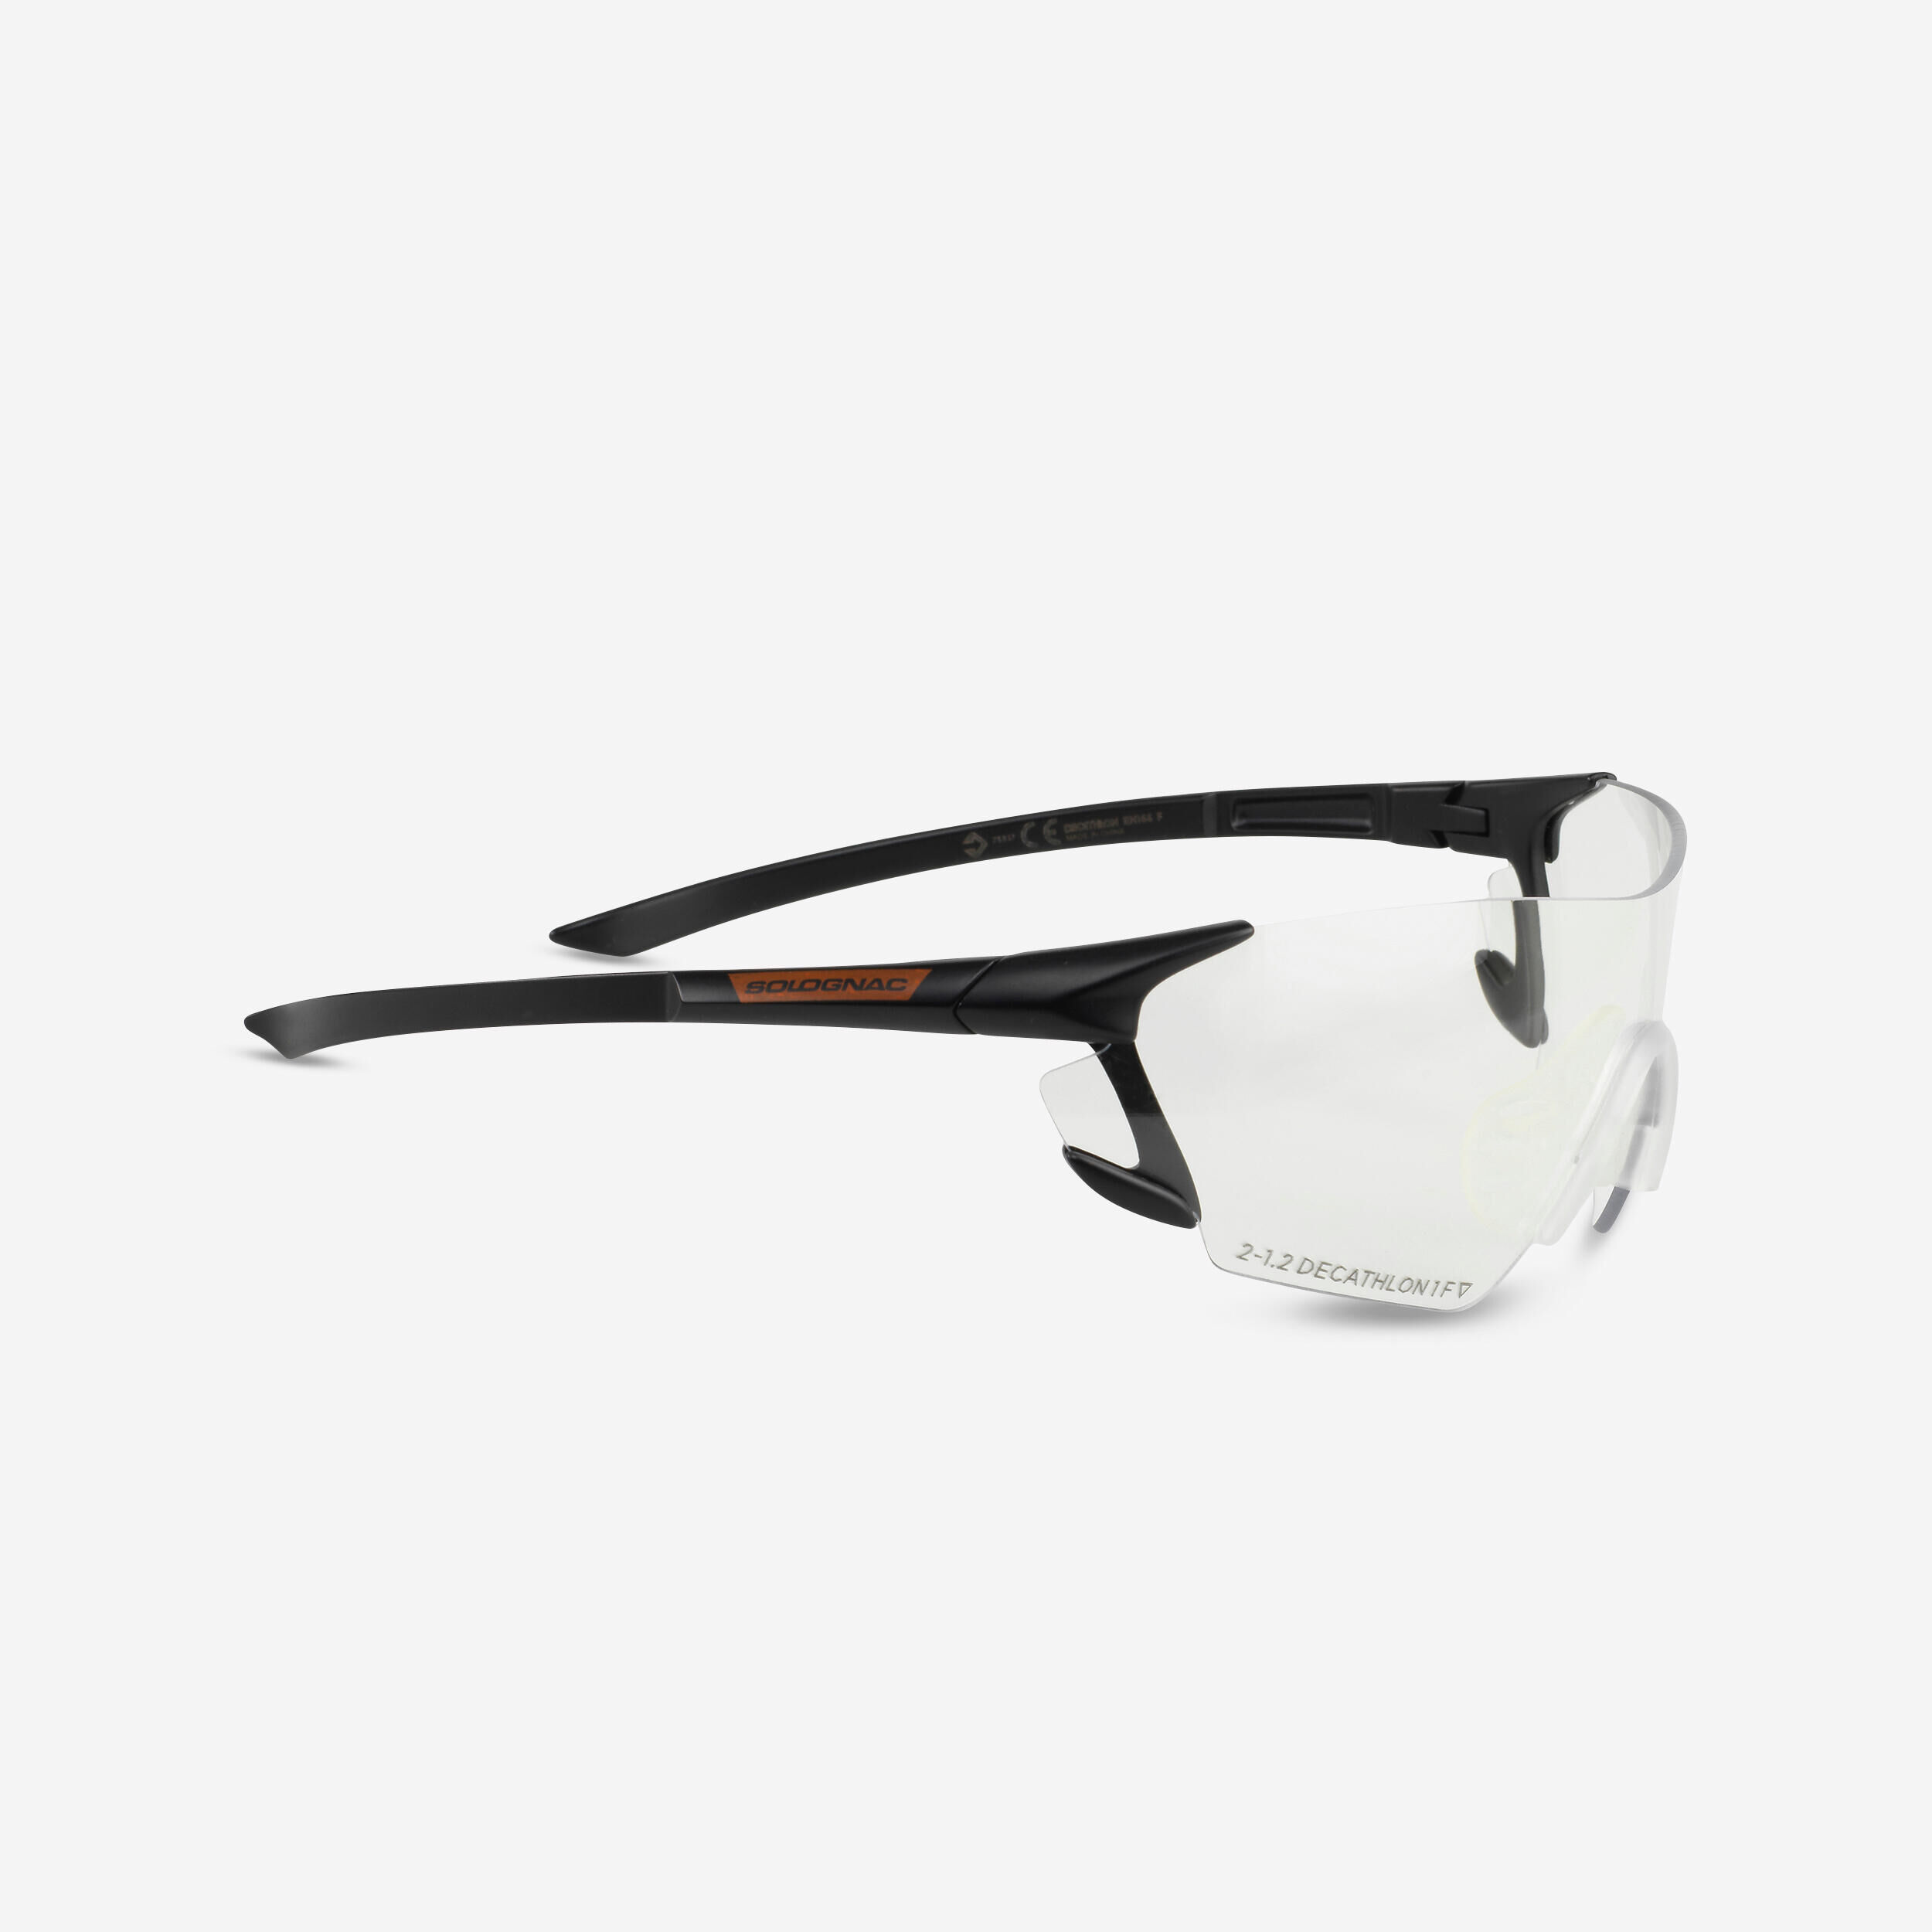 SOLOGNAC CLAY PIGEON SHOOTING PROTECTIVE GLASSES 100, PLAIN STRONG LENSES, CATEGORY 0